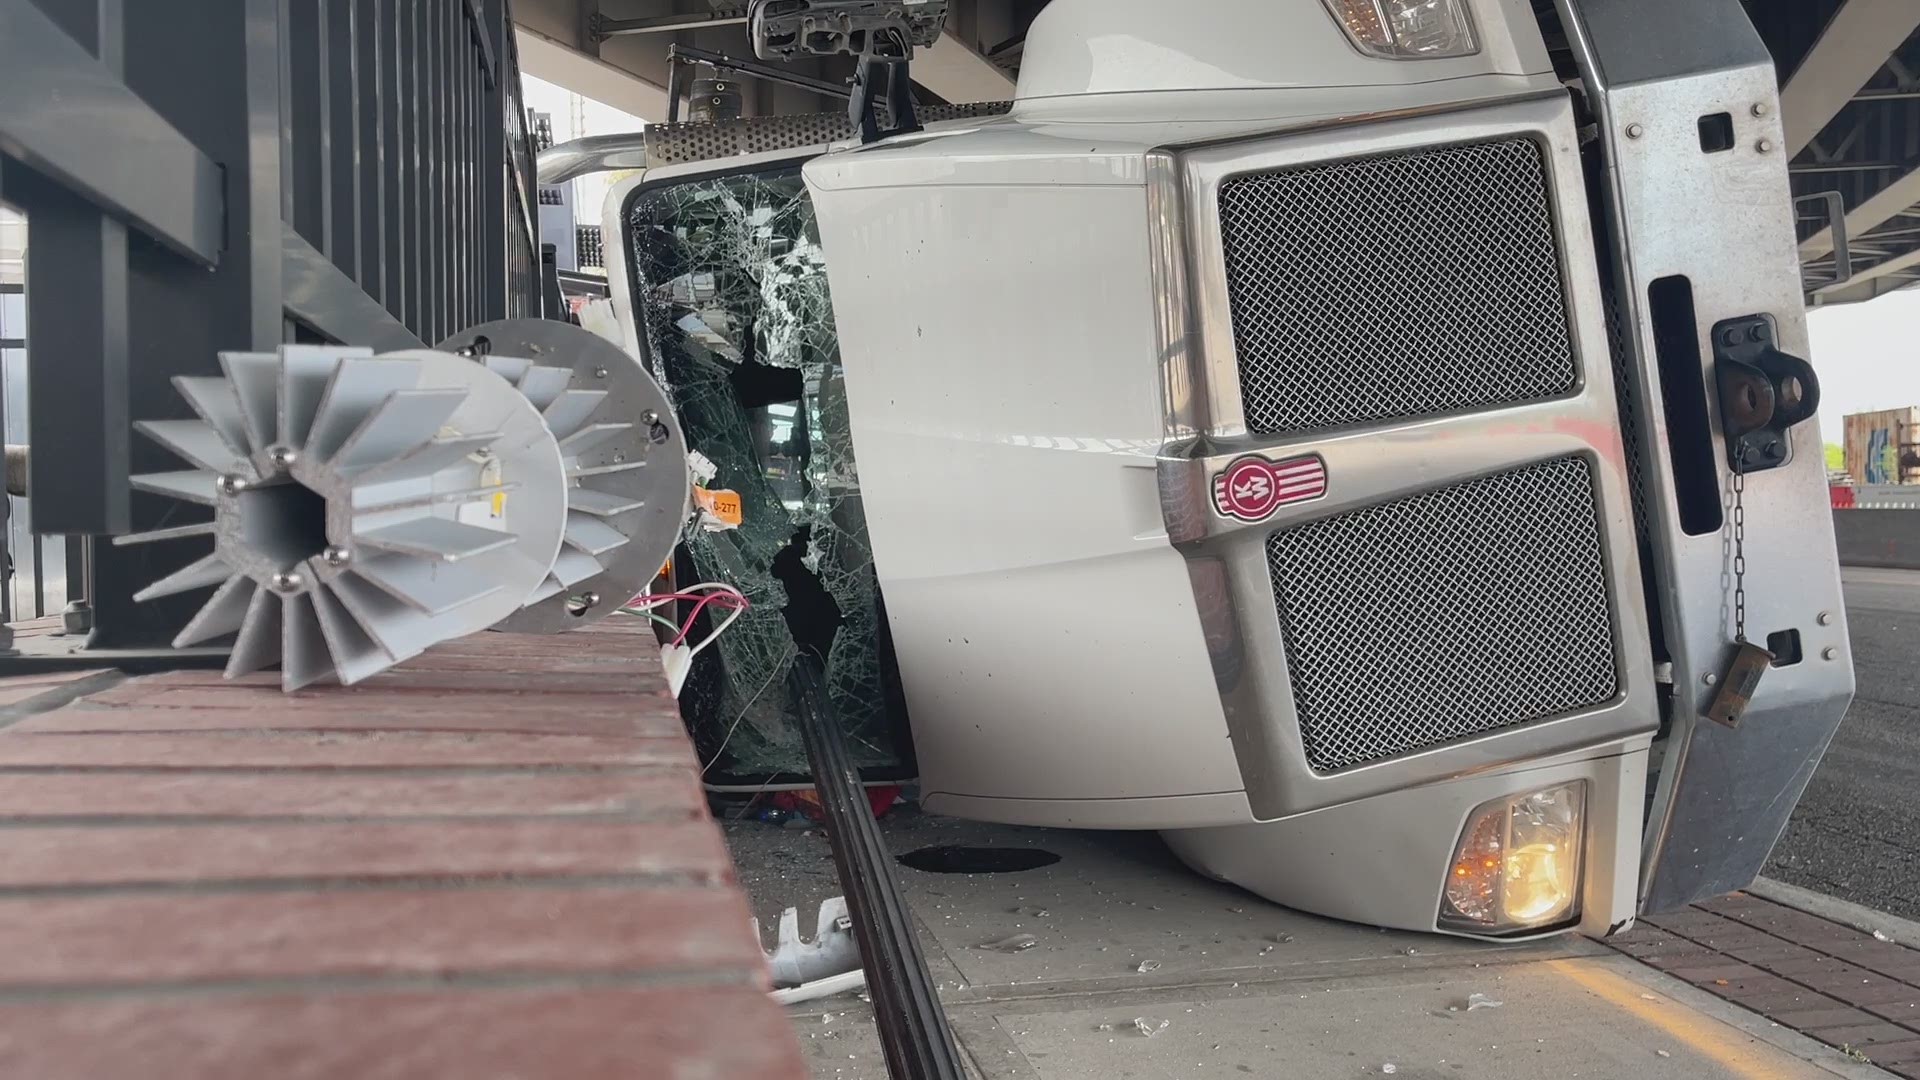 The truck traveled under a bridge on Bay Street with its back raised, causing it to hit the bridge and overturn, according to a witness of the crash.